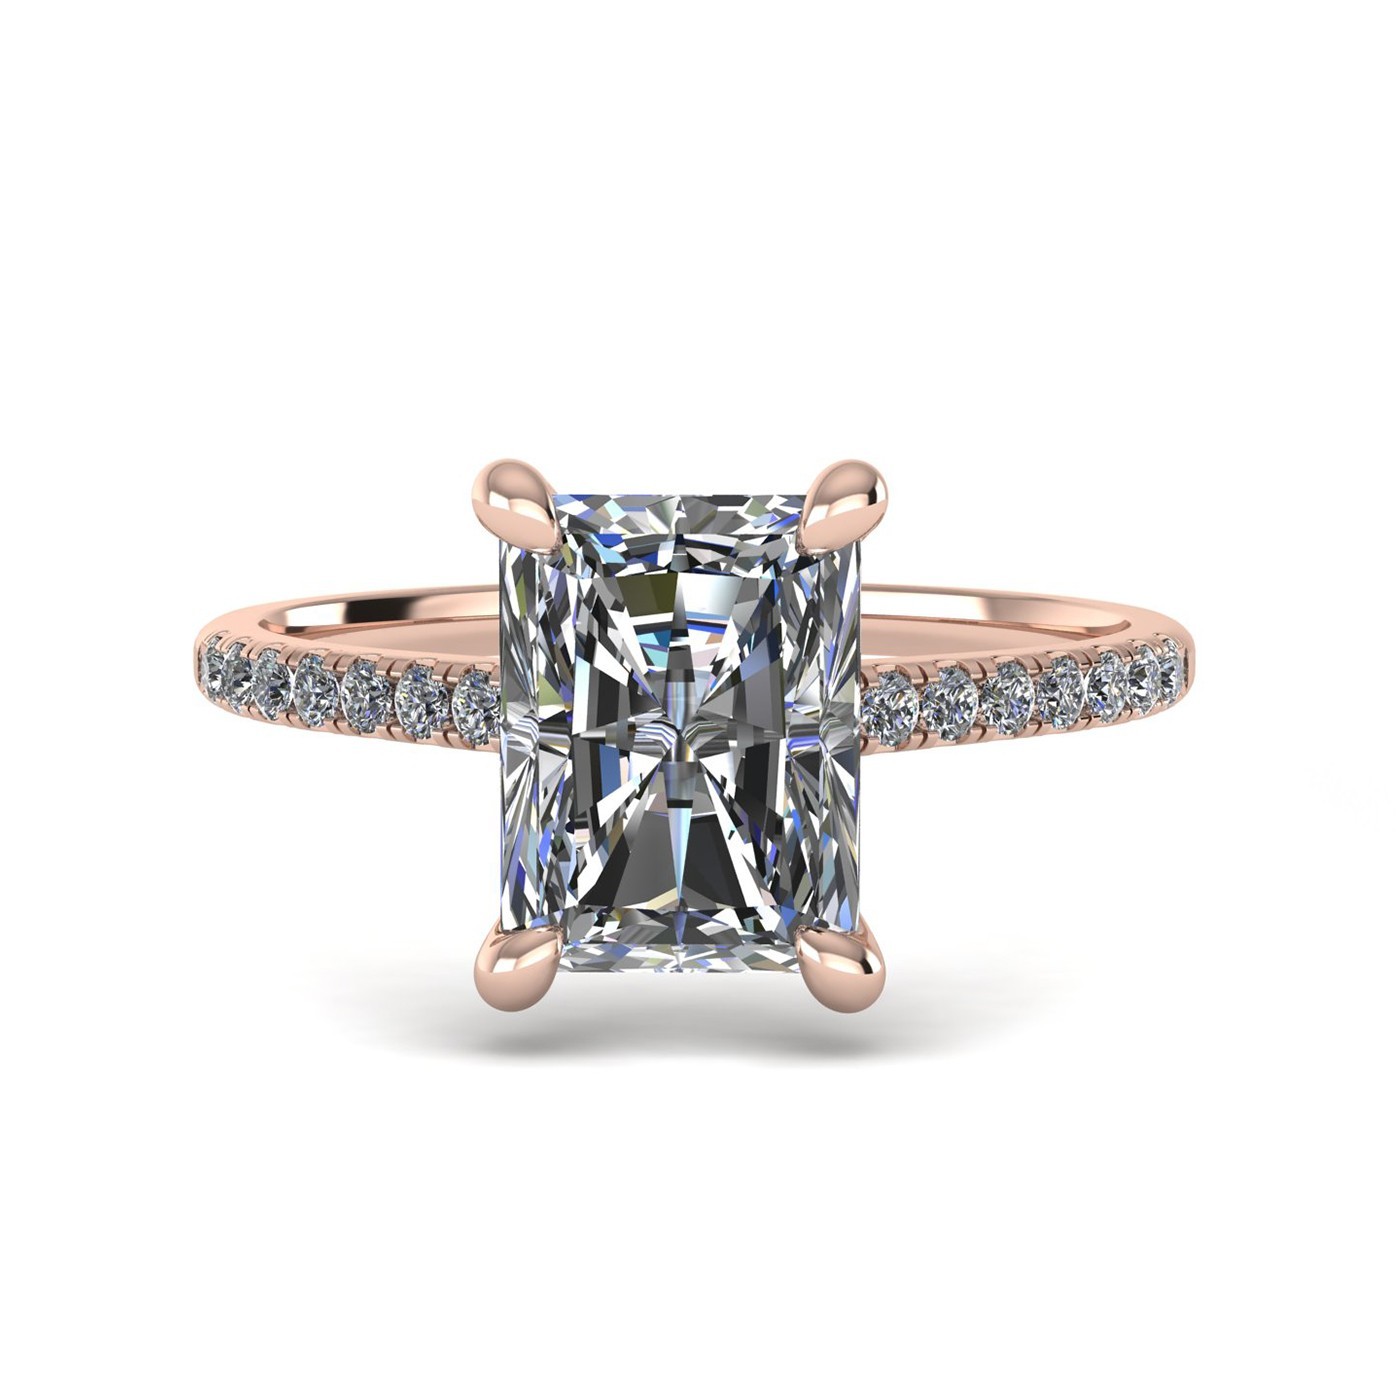 18k rose gold  0,30 ct 4 prongs radiant cut diamond engagement ring with whisper thin pavÉ set band Photos & images